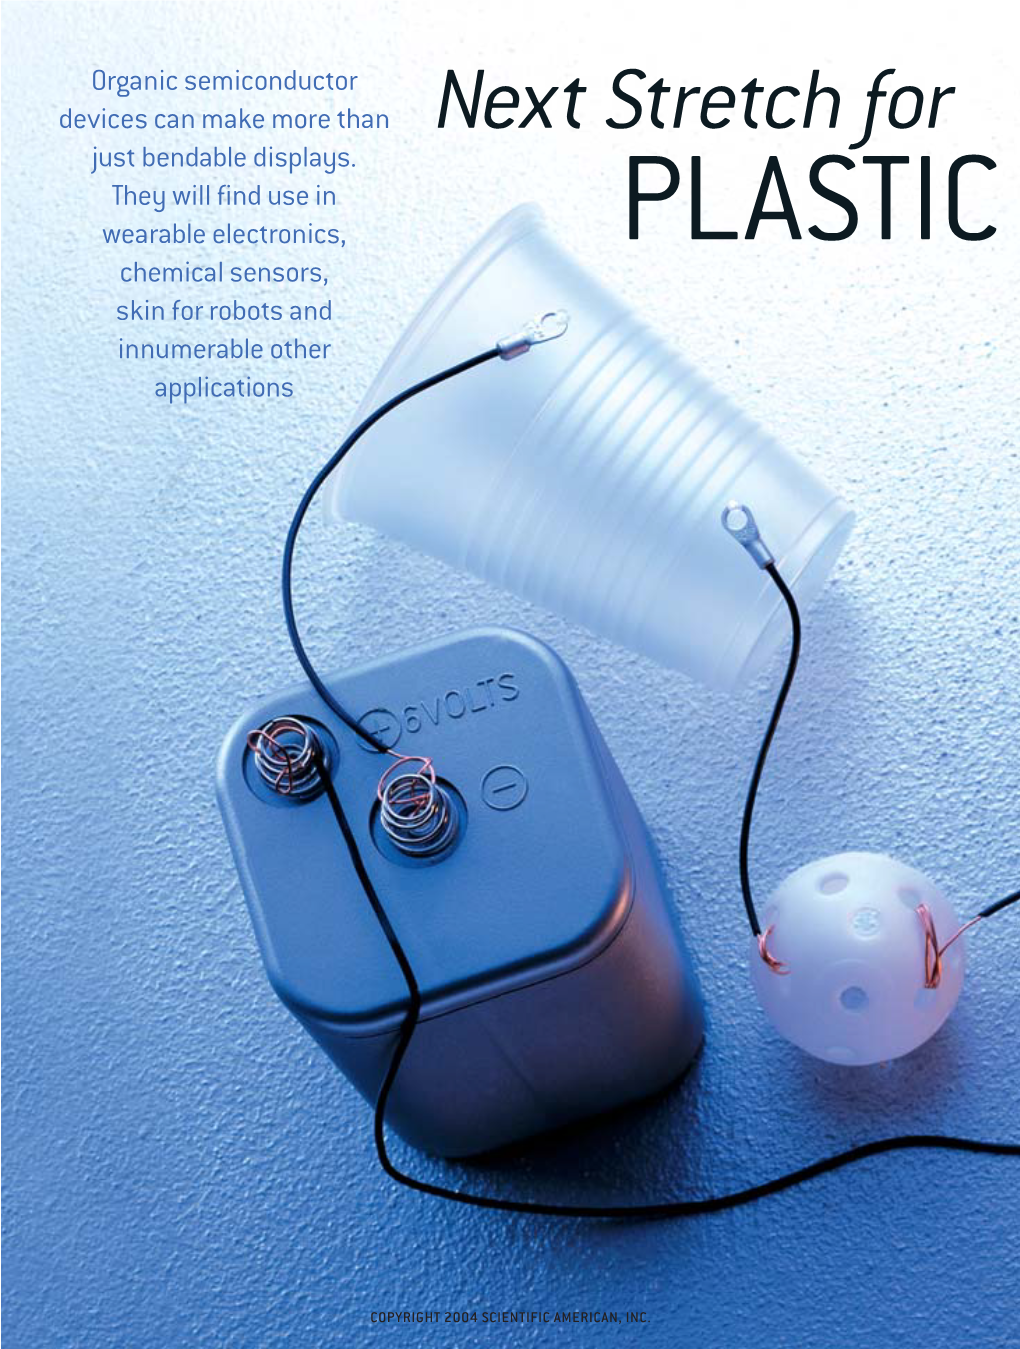 Plastic Electronics Products Are Hitting